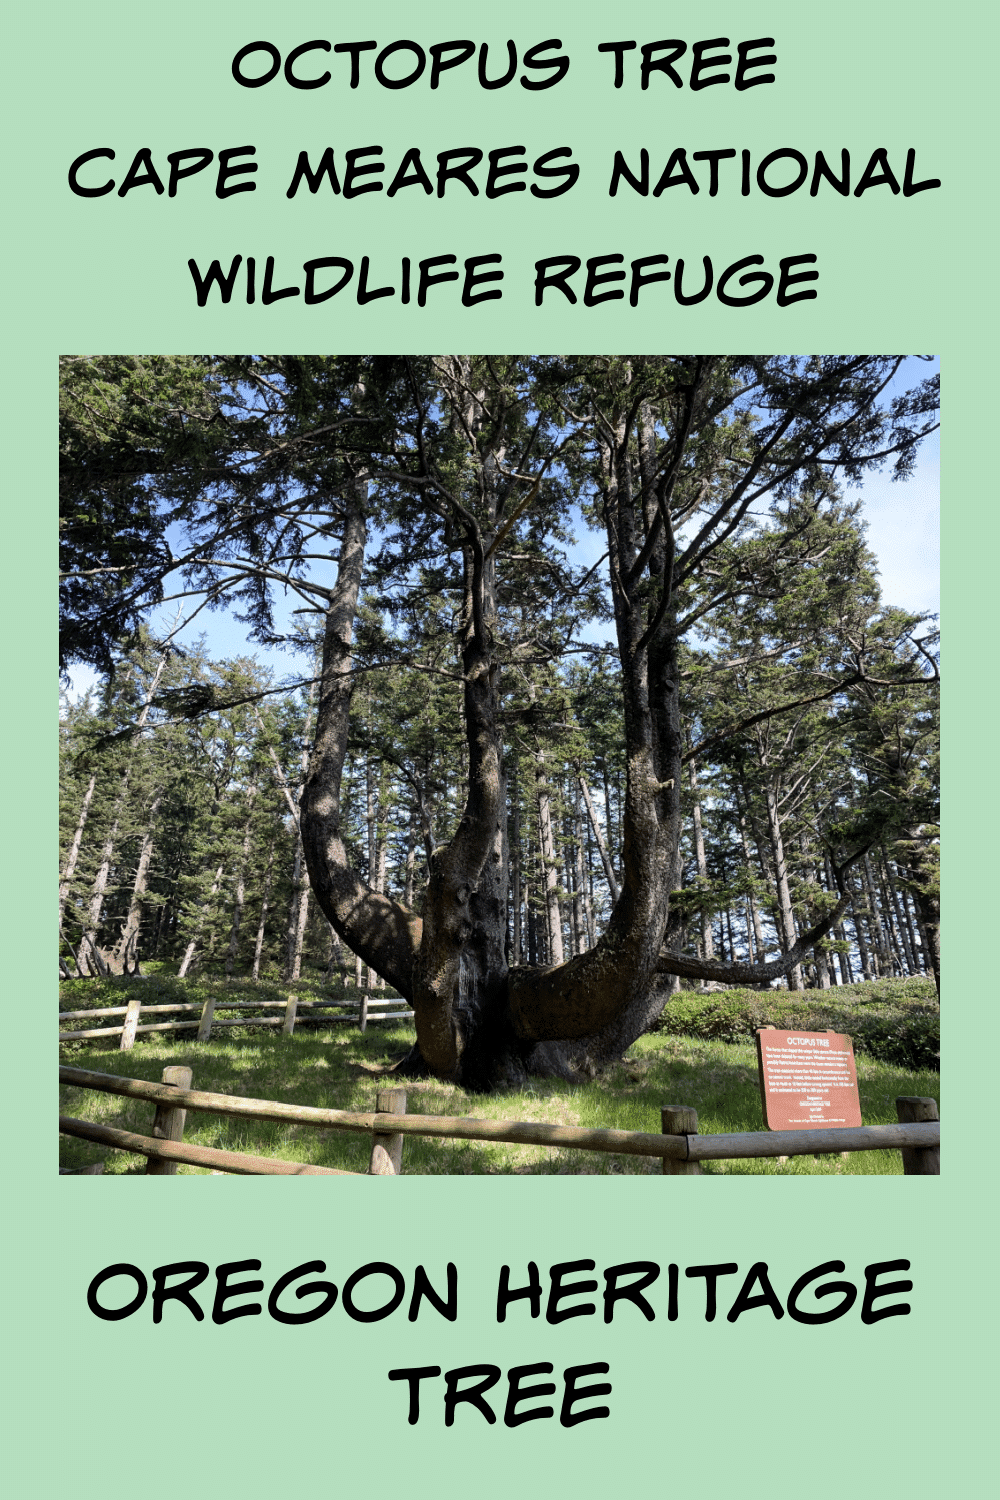 Octopus Tree Heritage Tree in Cape Meares National Wildlife Refuge green pinterest pin